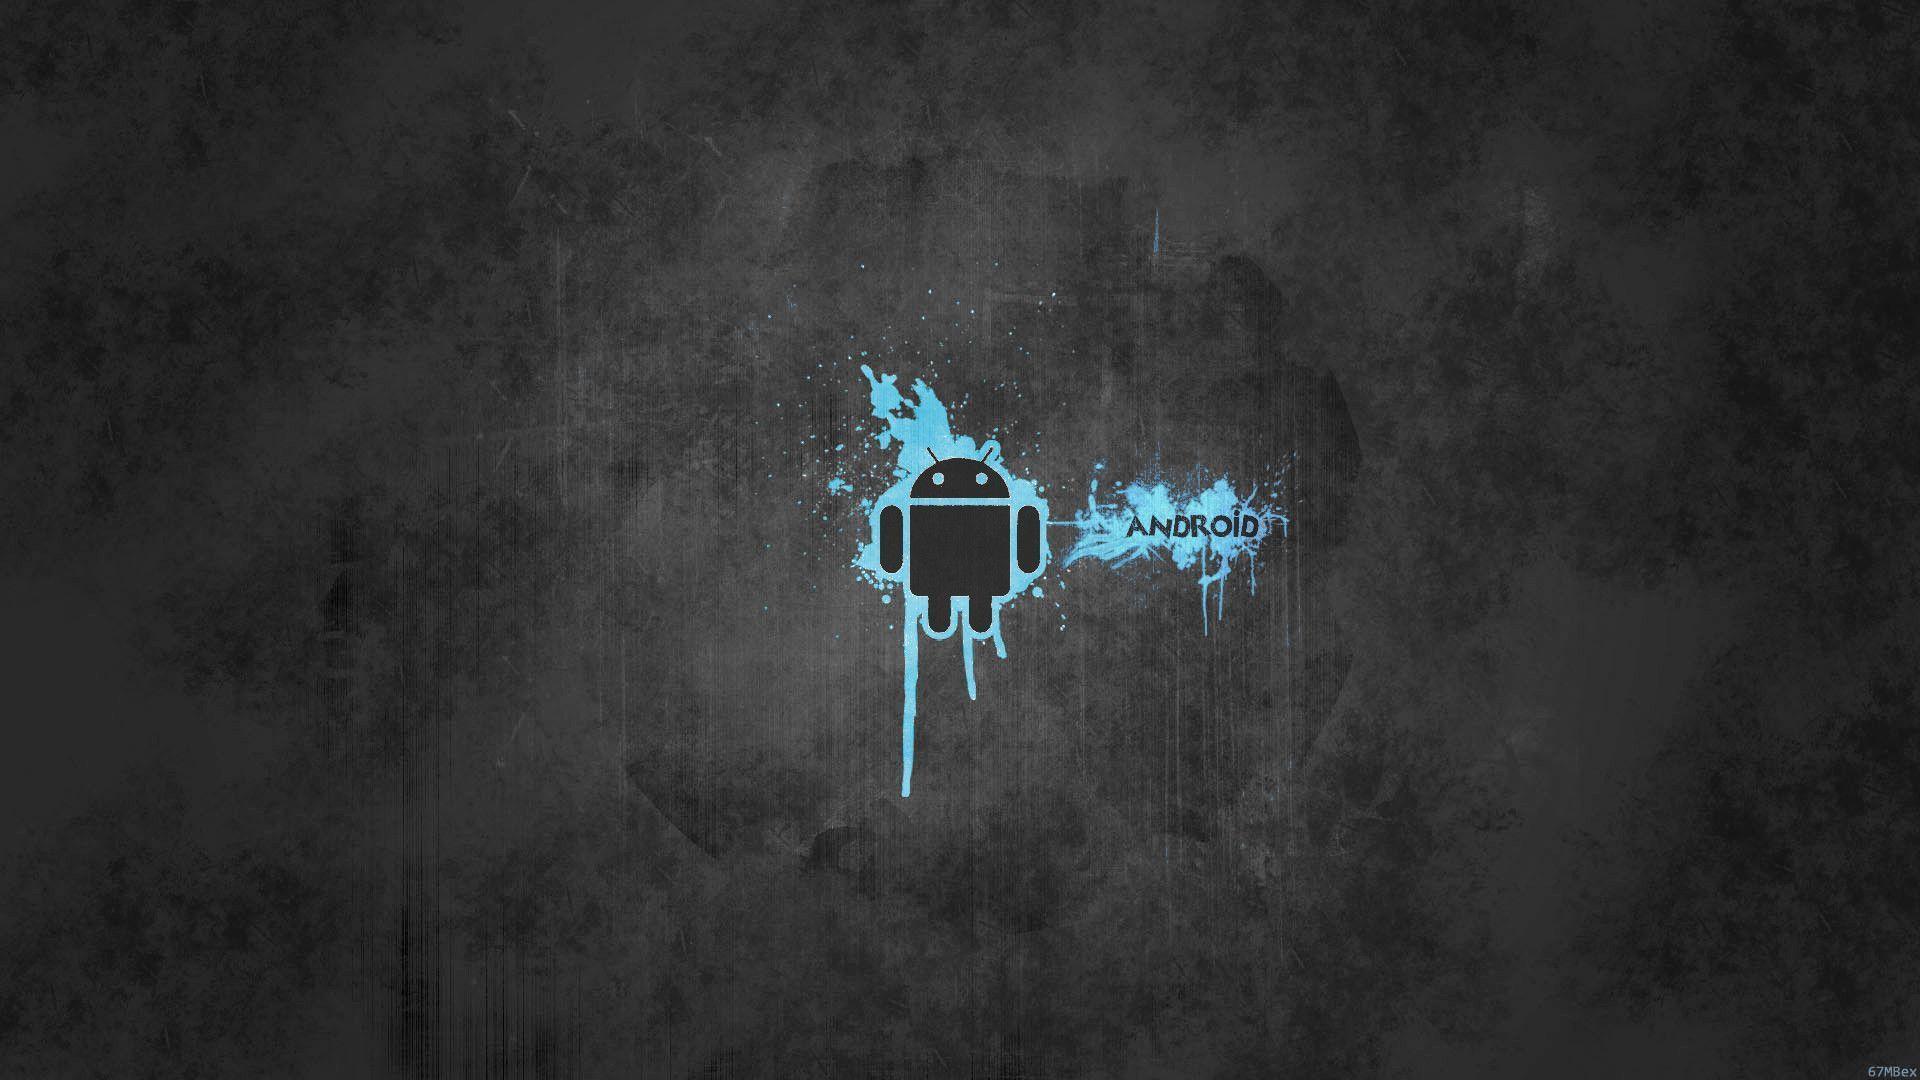 Android Grafiti Walpaper 36646 High Resolution. download all free